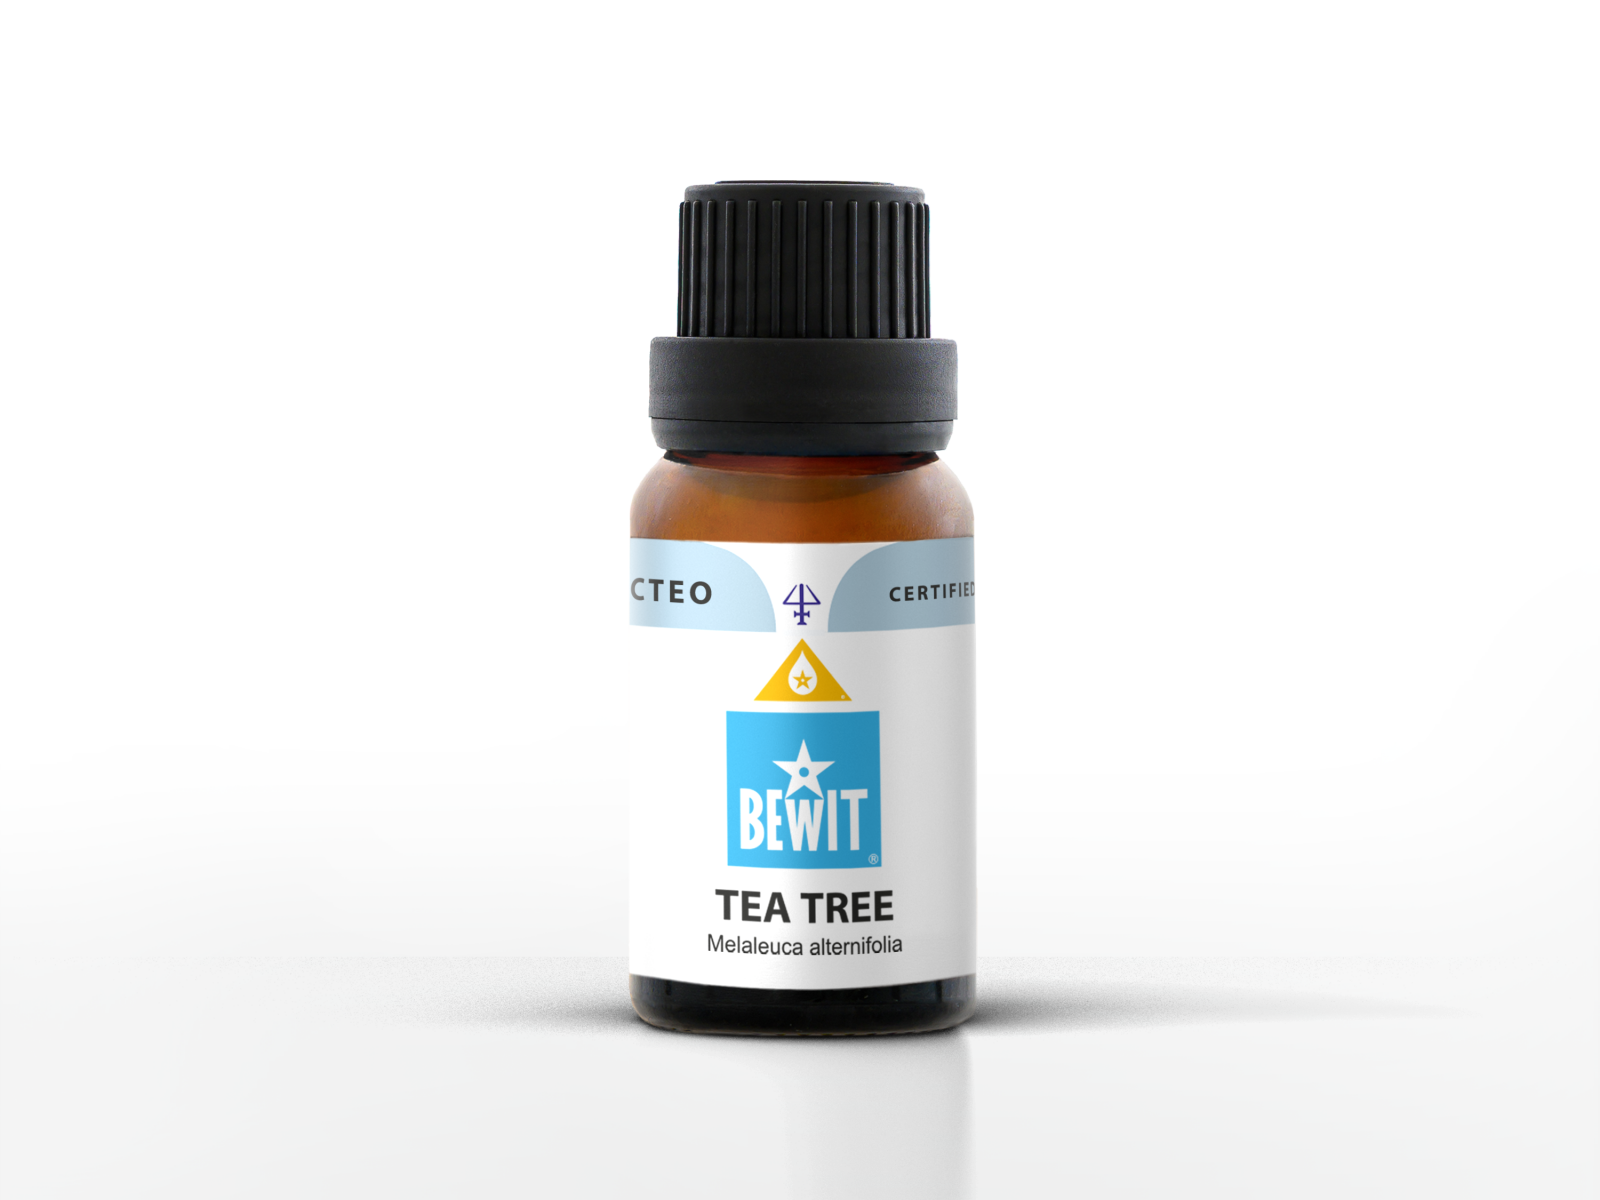 BEWIT Tea tree - 100% pure and natural CTEO® essential oil - 3